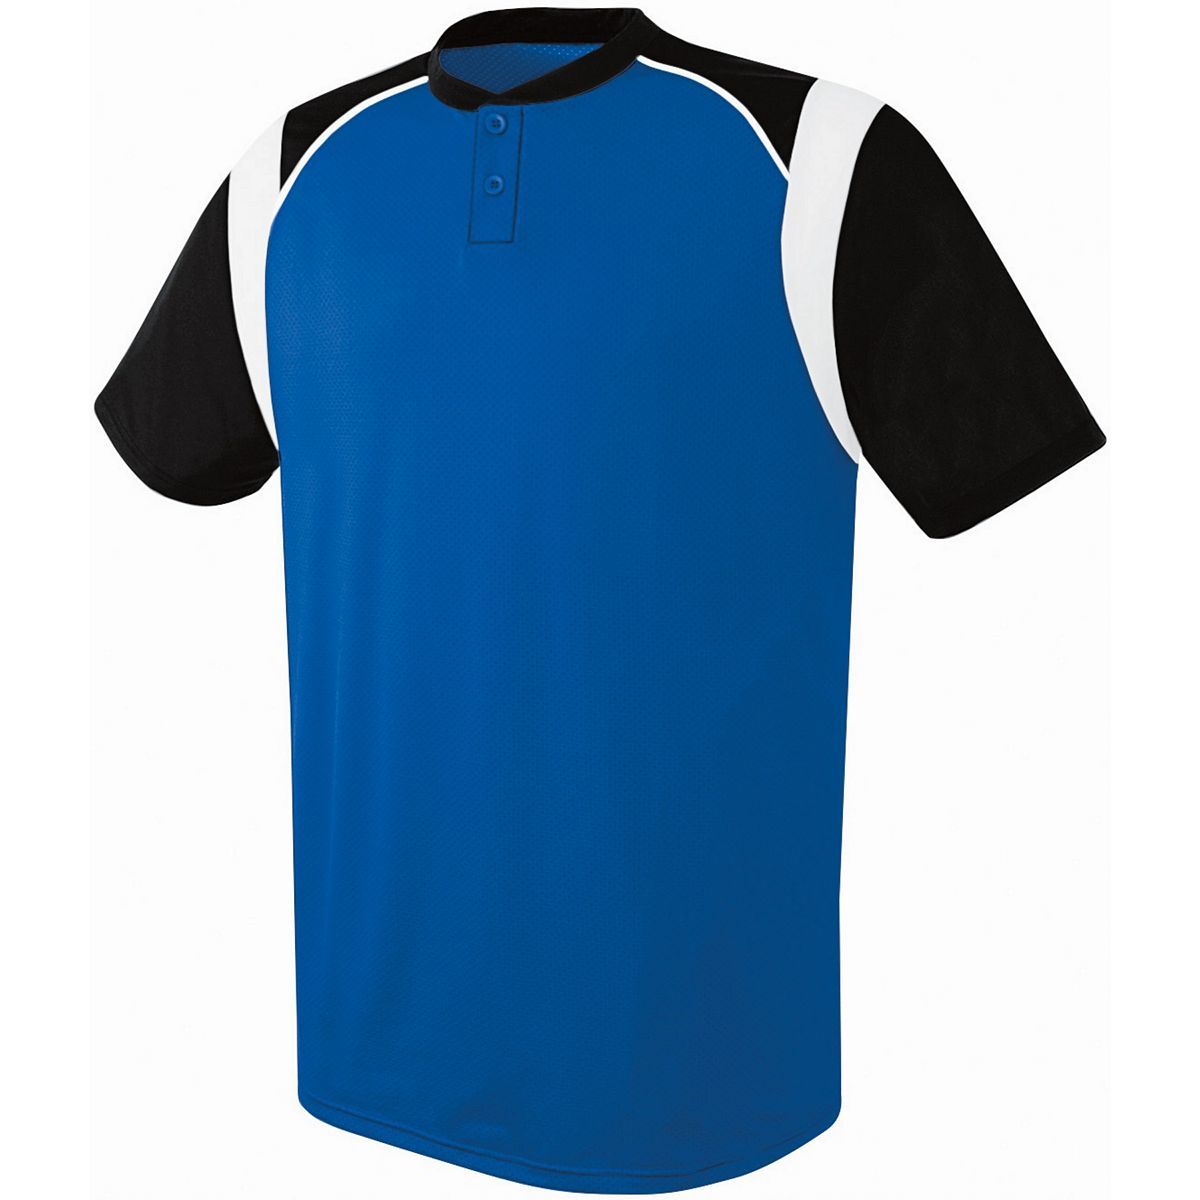 Augusta Sportswear Youth Wildcard Two-Button Jersey in Royal/Black/White  -Part of the Youth, Youth-Jersey, Augusta-Products, Baseball, Shirts, All-Sports, All-Sports-1 product lines at KanaleyCreations.com